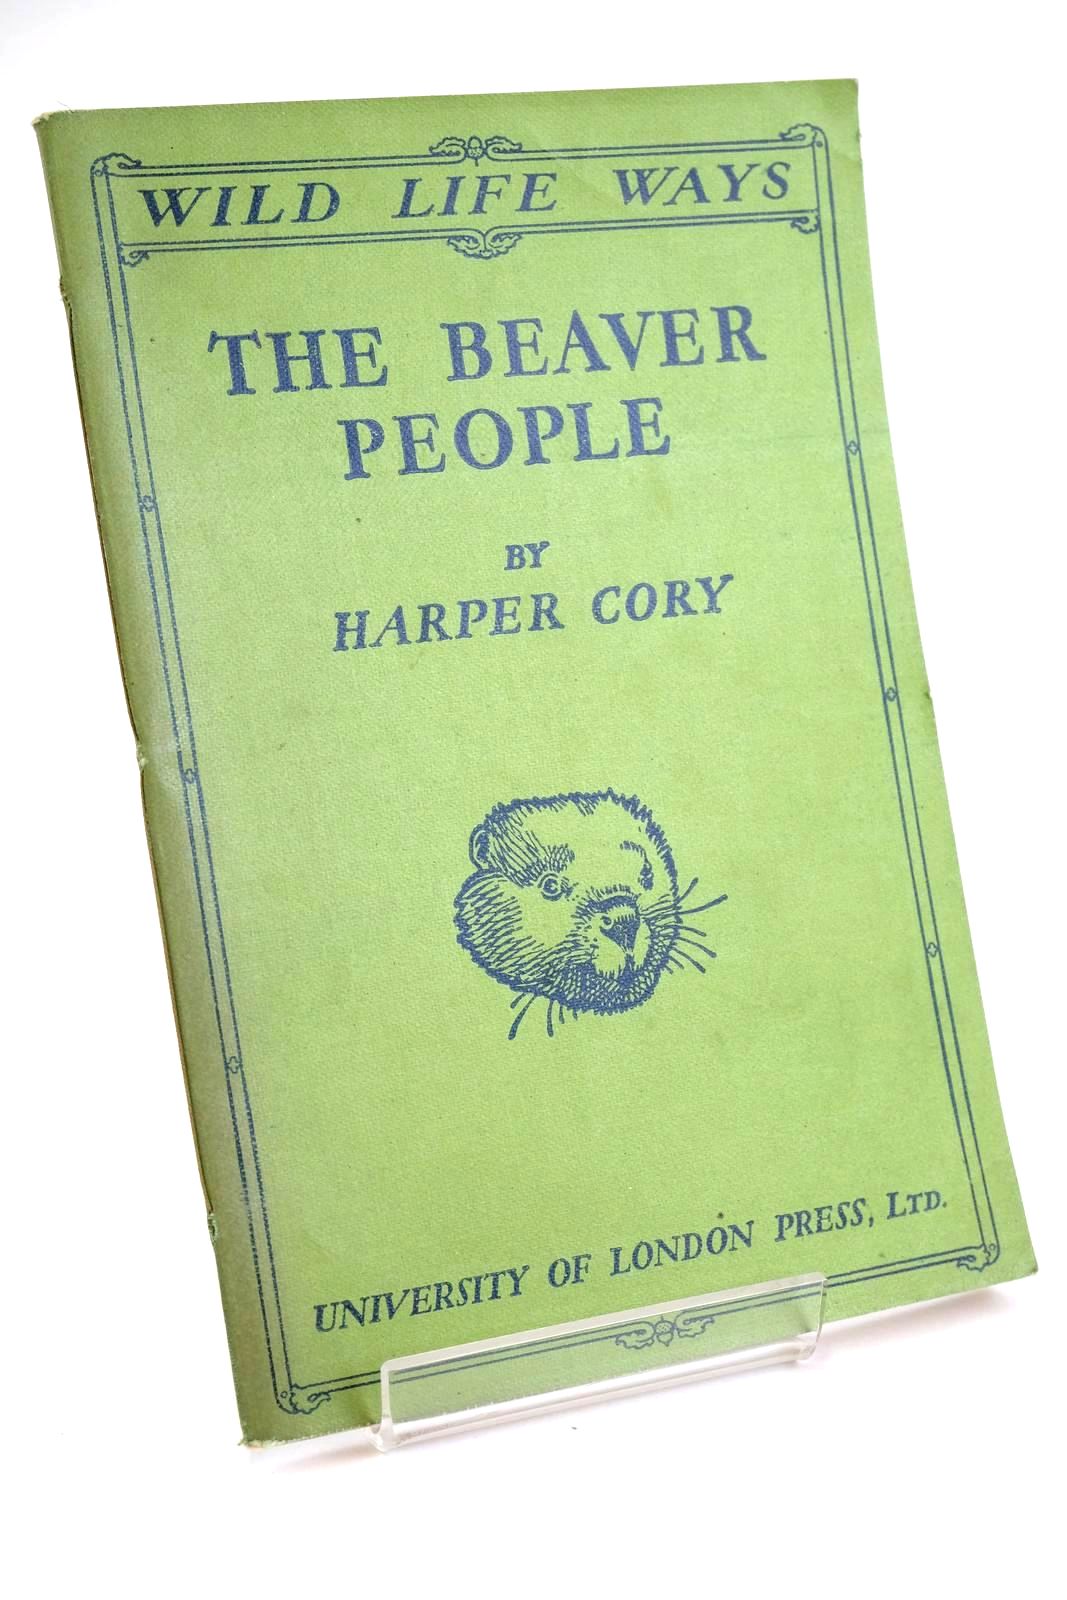 Photo of THE BEAVER PEOPLE written by Cory, Harper illustrated by Parker, W.N. published by University of London Press Ltd. (STOCK CODE: 1328046)  for sale by Stella & Rose's Books